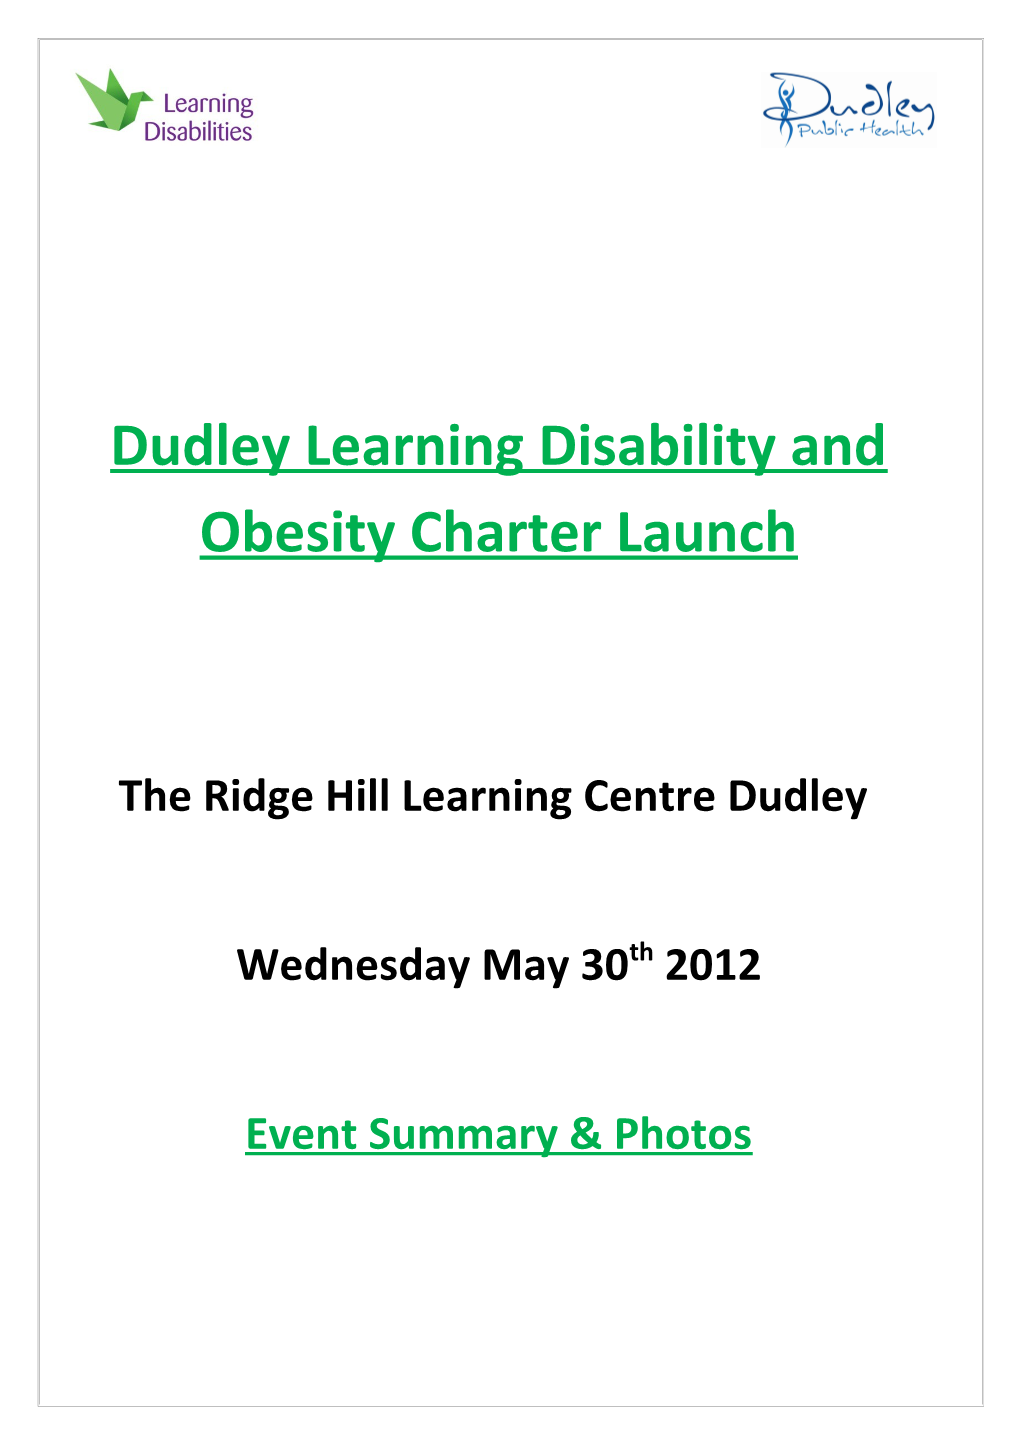 Dudley Learning Disability and Obesity Charter Launch